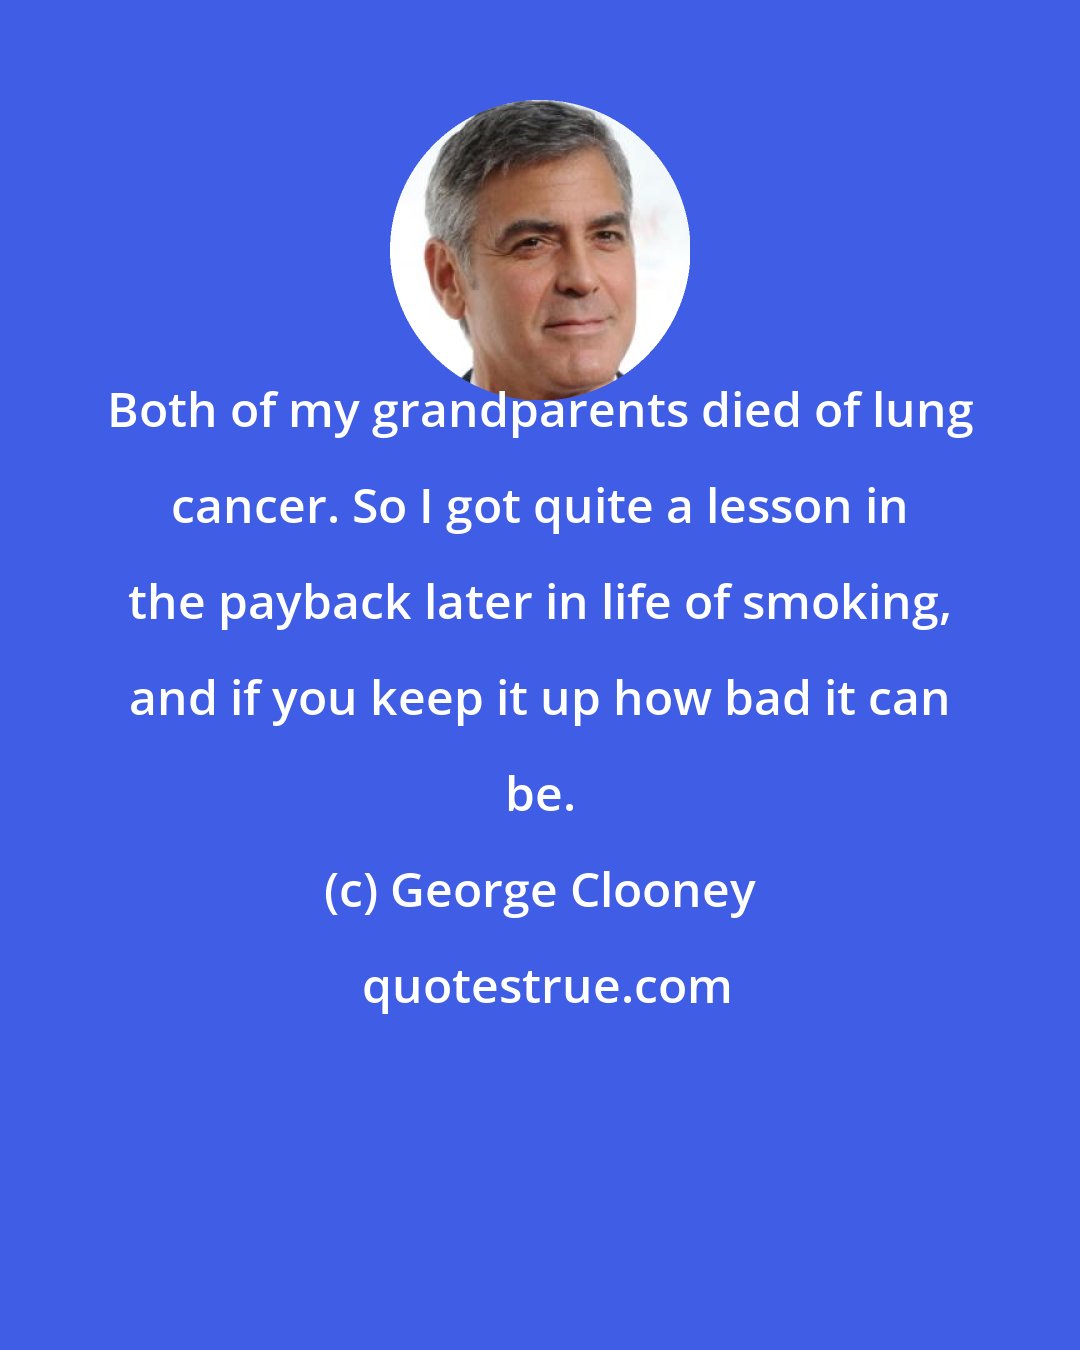 George Clooney: Both of my grandparents died of lung cancer. So I got quite a lesson in the payback later in life of smoking, and if you keep it up how bad it can be.